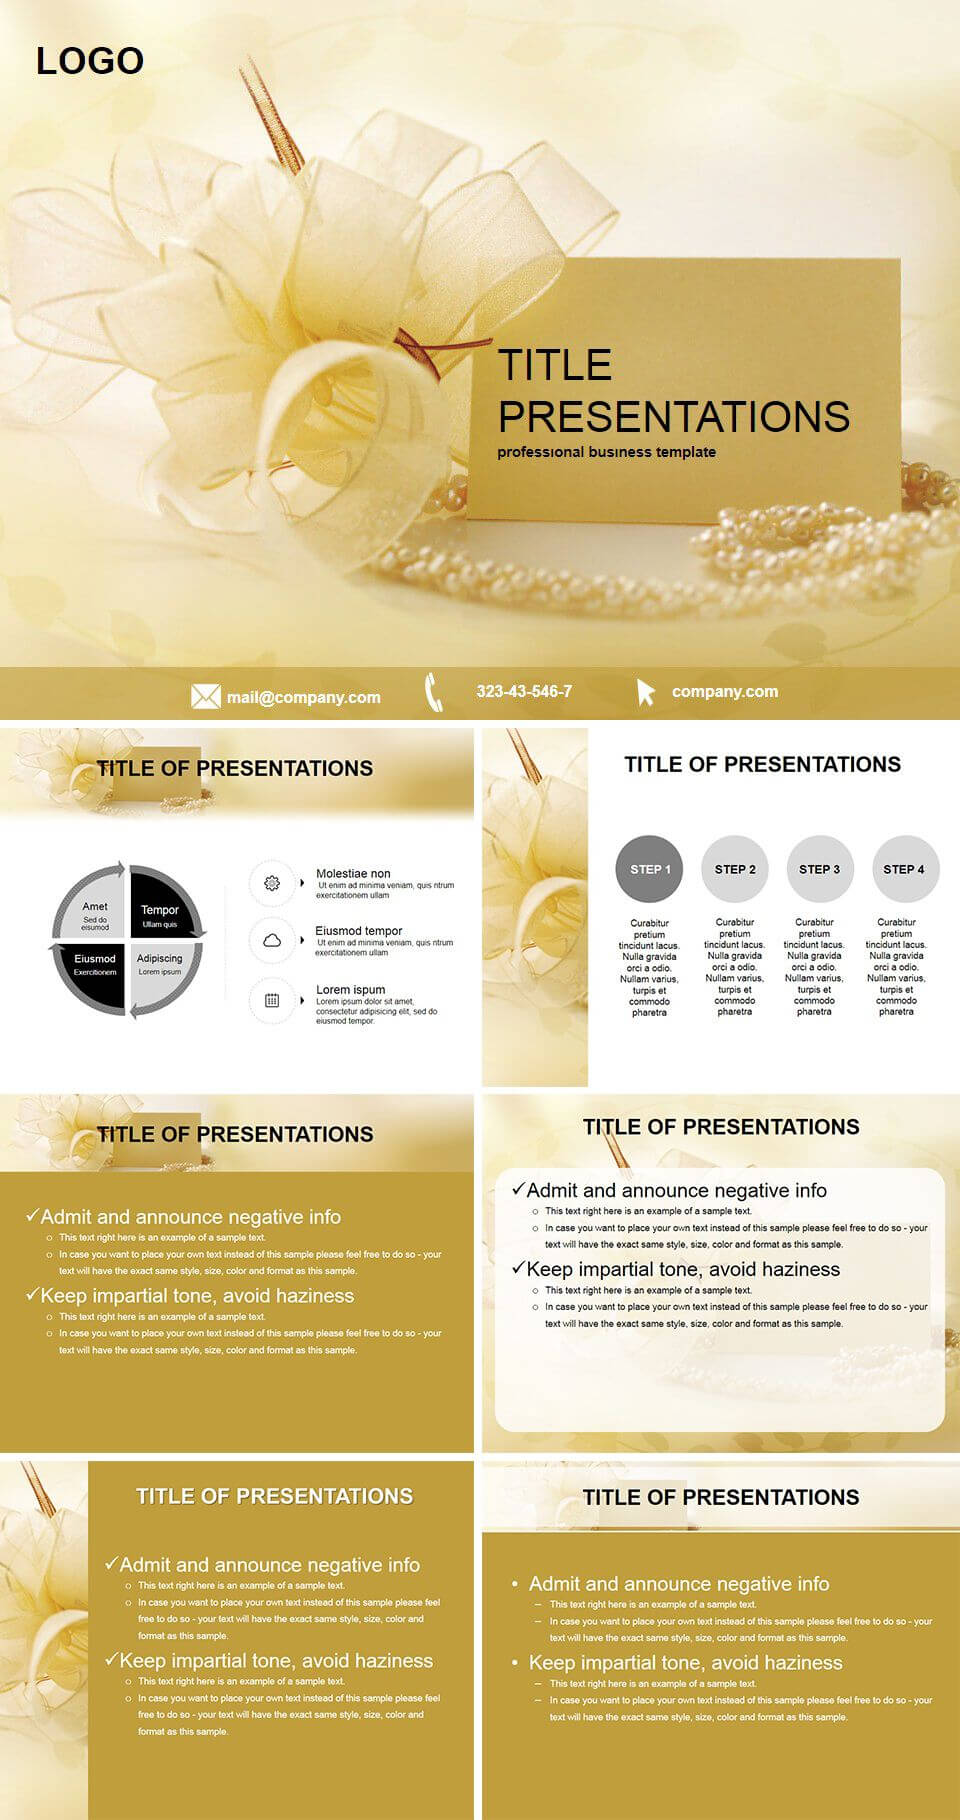 Greeting Card Powerpoint Templates | Powerpoint Templates With Regard To Greeting Card Template Powerpoint